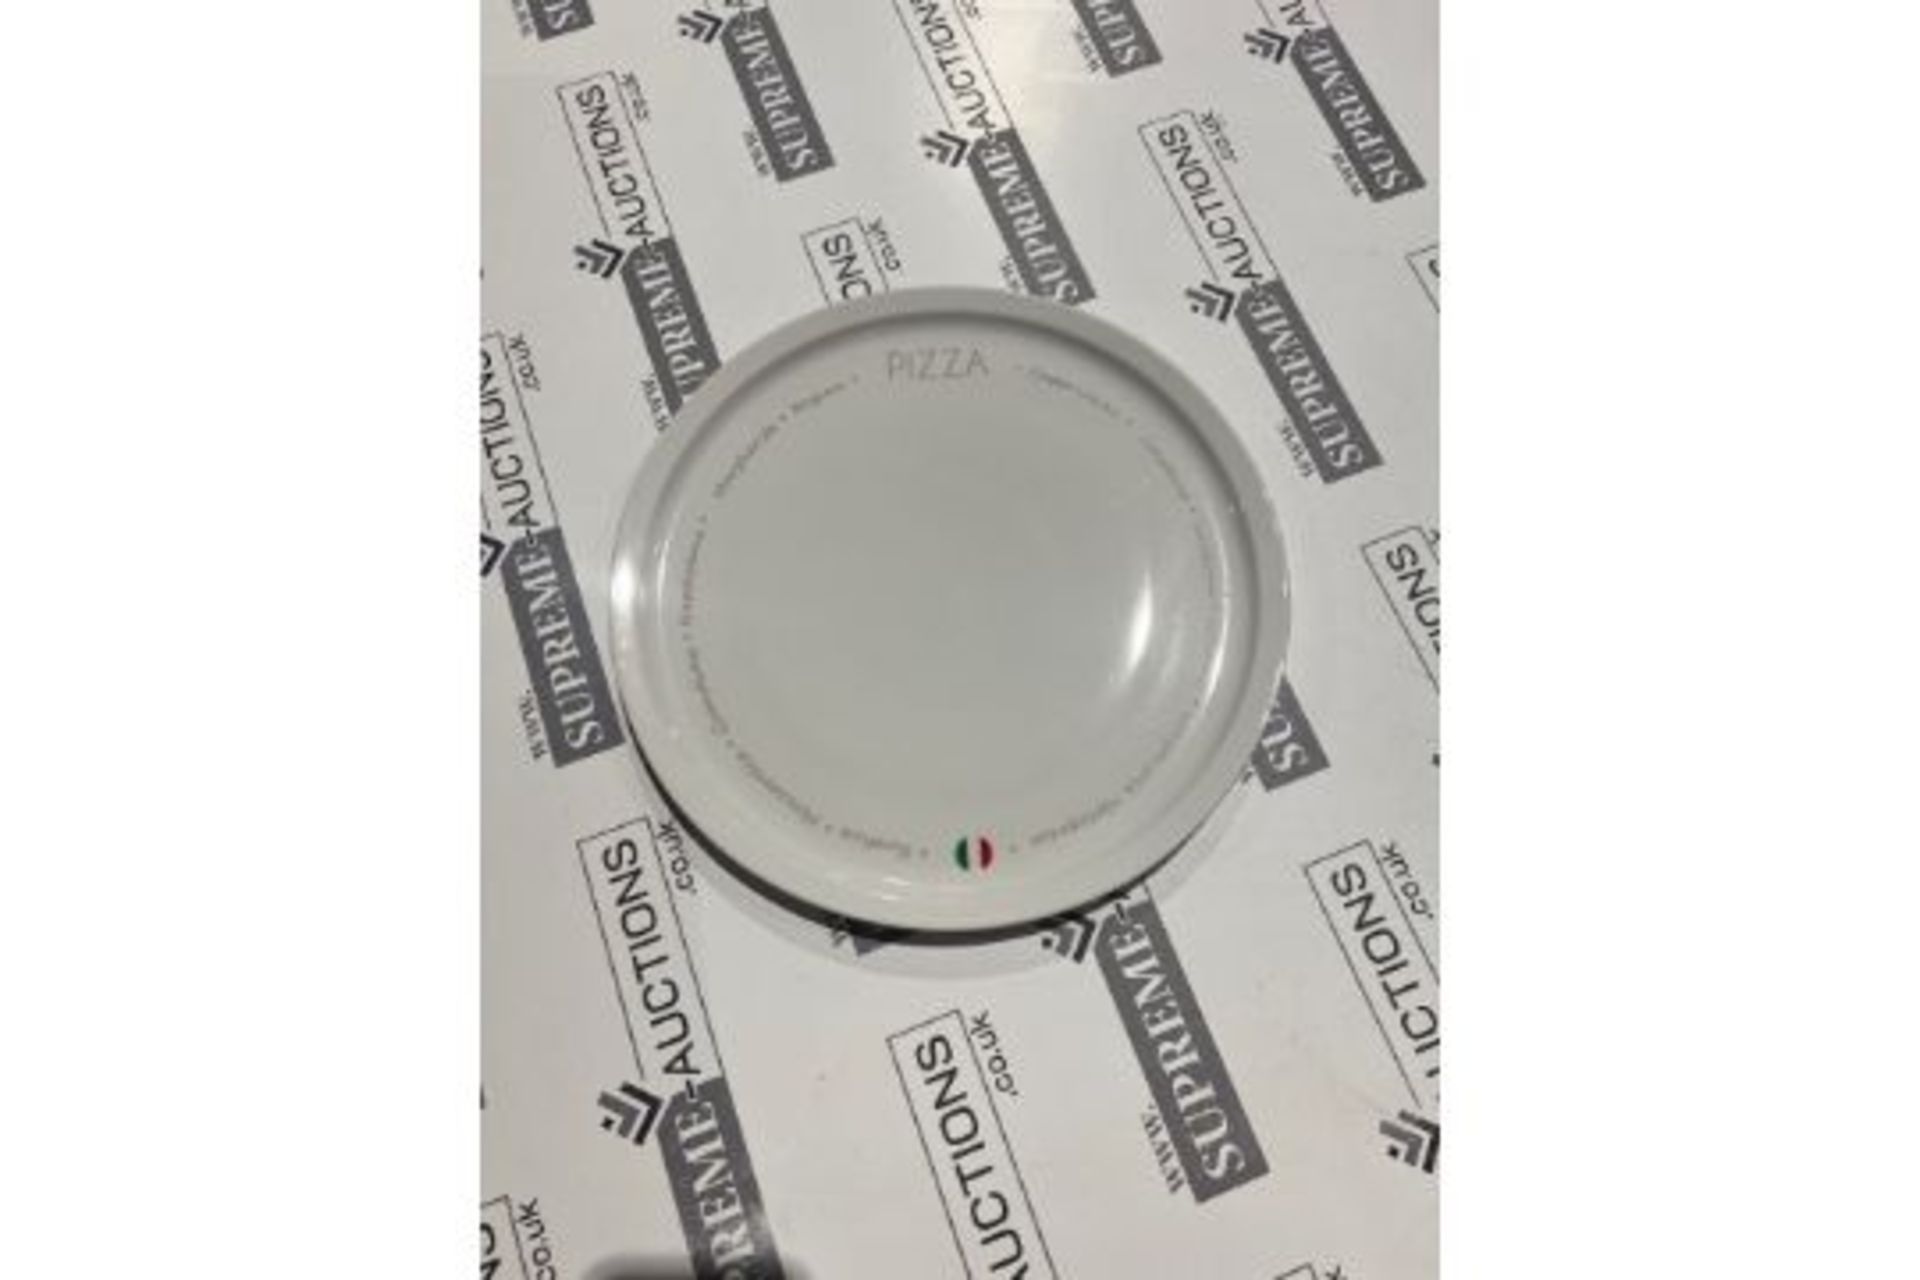 TRADE LOT TO CONTAIN 360 X BRAND NEW ARTMADIS NOVASTYL PIZZA ROUND PLATES WITH FLAG DETAIL, - Image 2 of 2